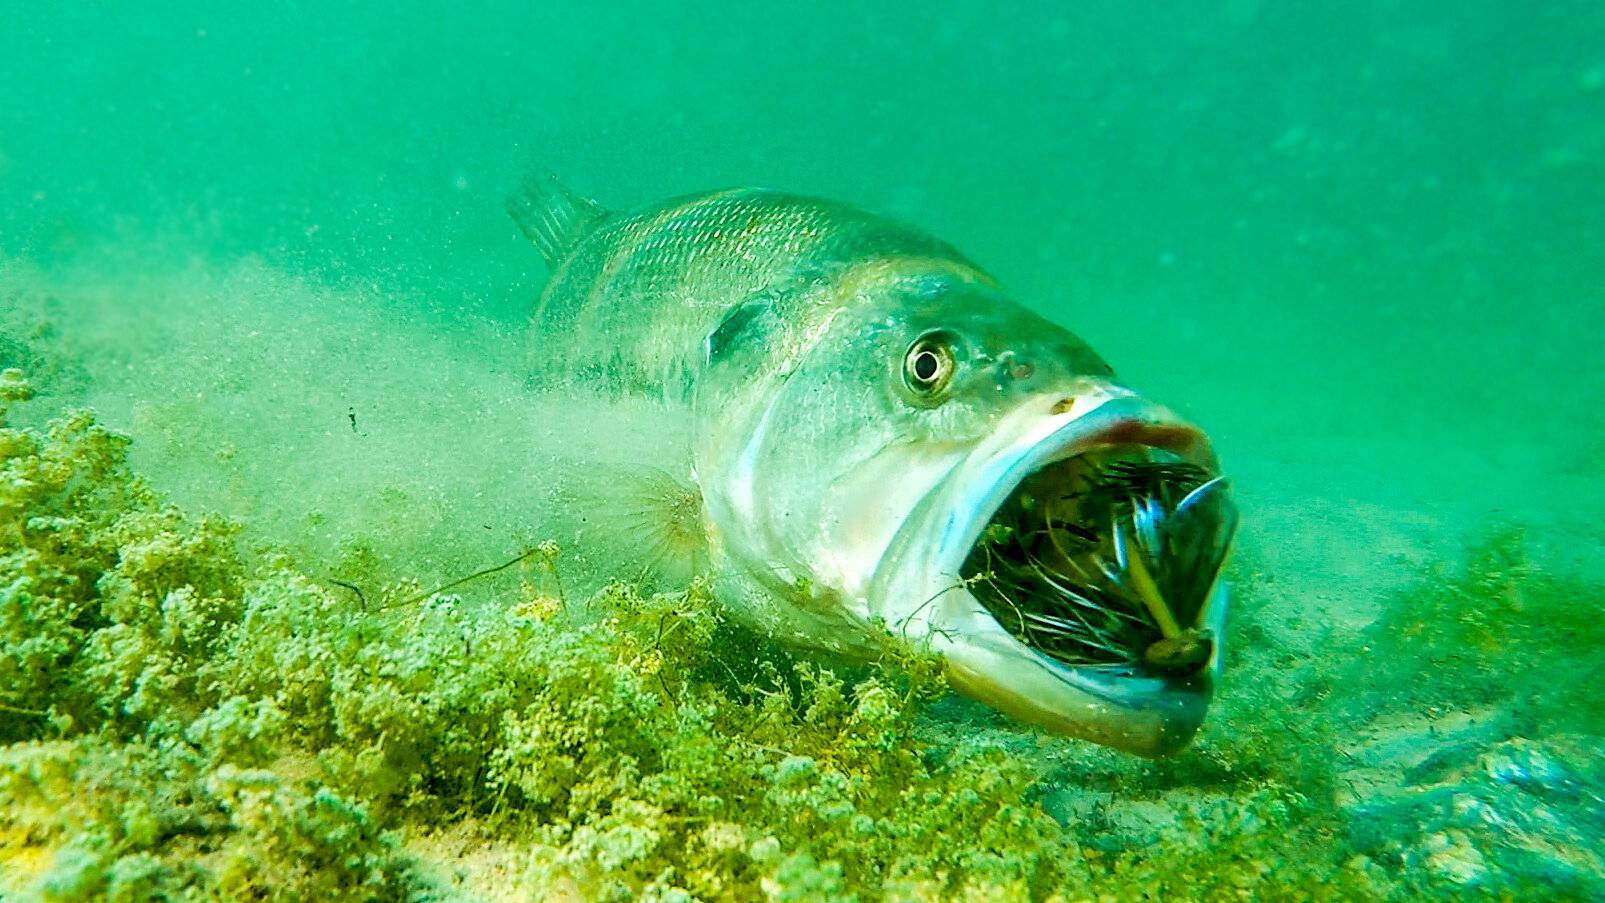 Insane Underwater Footage** Fish Attacking Lures And Bass Fishing Tips! 